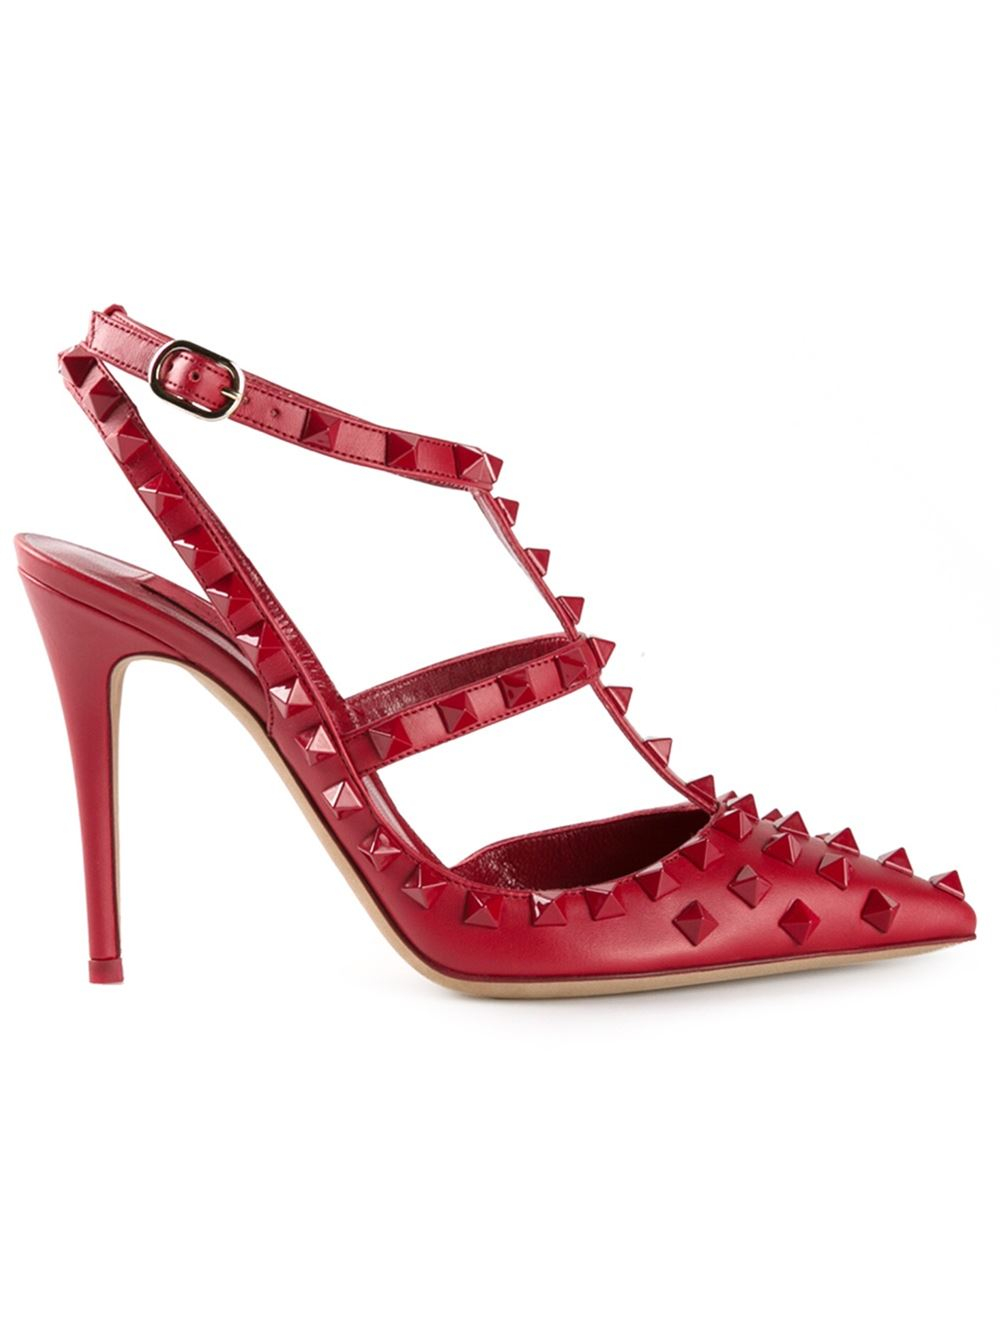 Valentino Rockstud Rouge Pumps in Red | Lyst